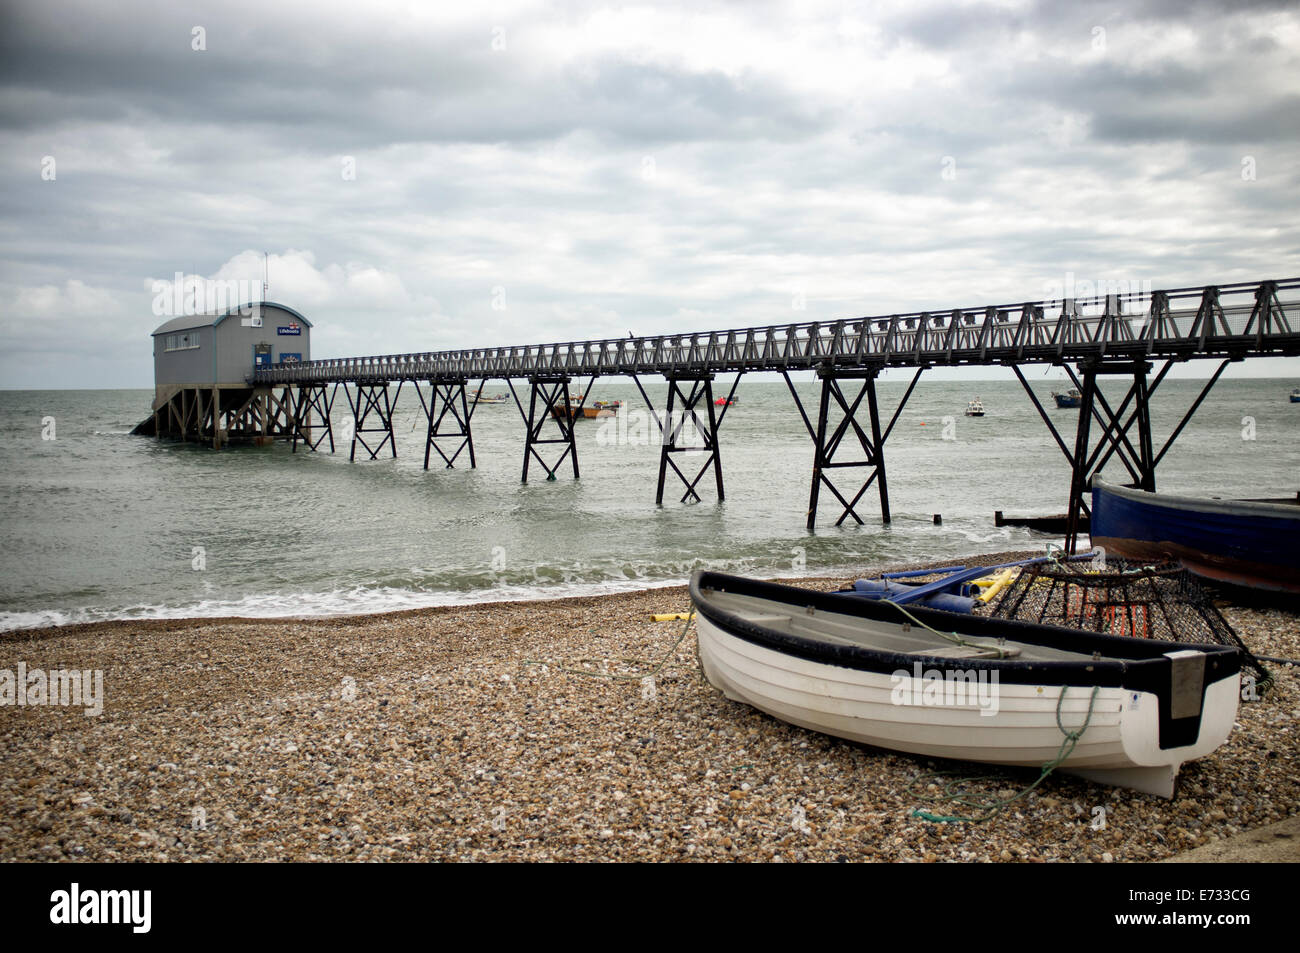 RNLI Lifeboat Station in Selsey Bill in West Sussex, England Stockfoto